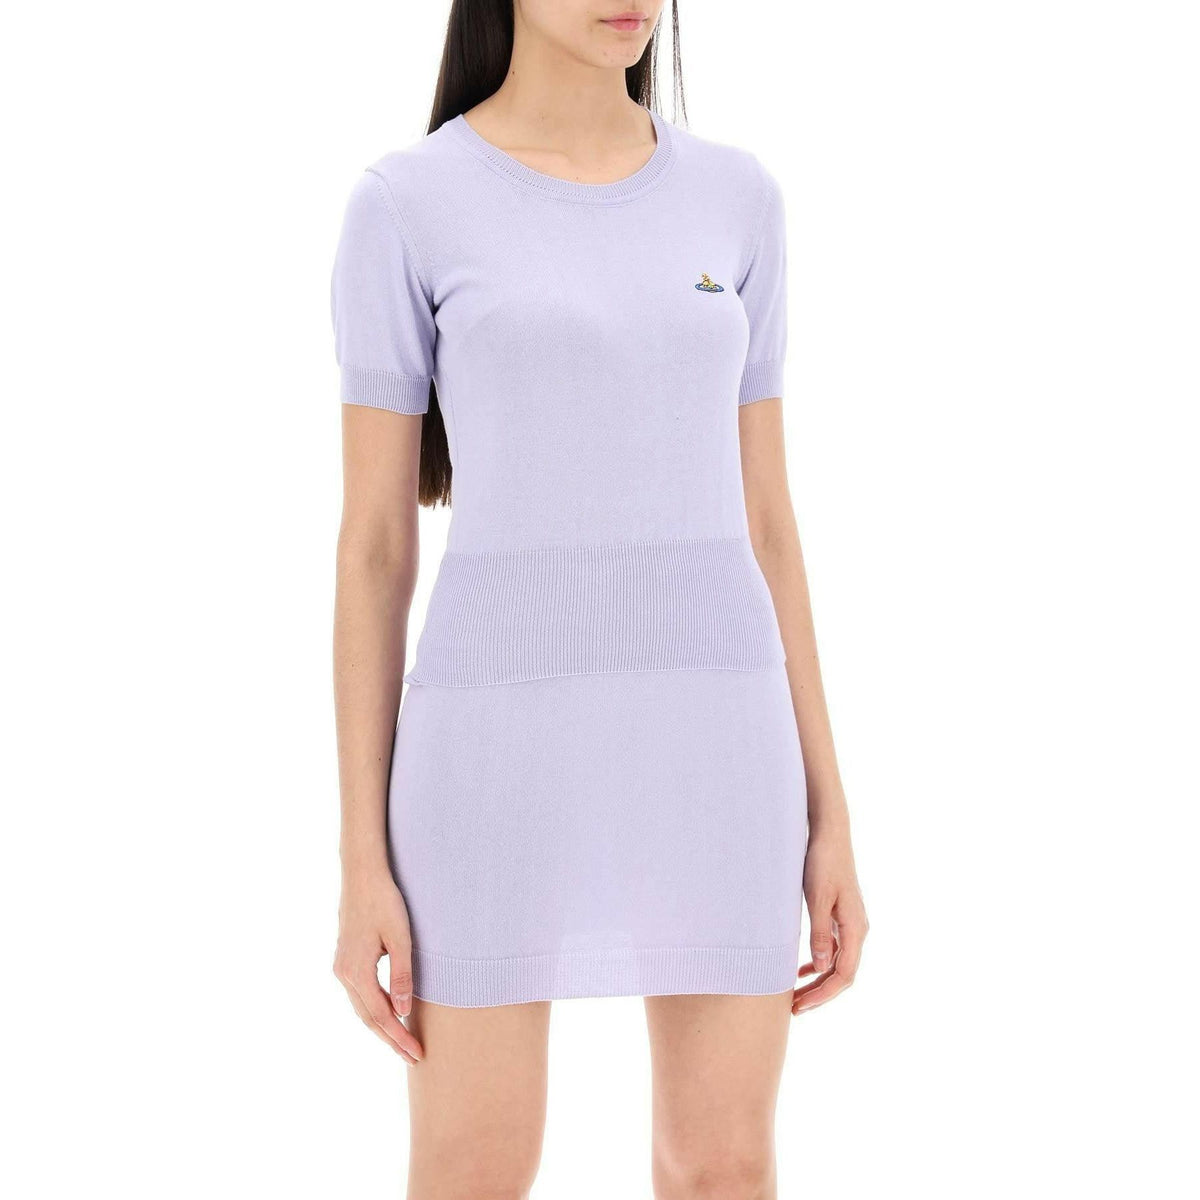 Lavender Bea Short Sleeve Cotton Sweater With Orb Embroidery VIVIENNE WESTWOOD JOHN JULIA.